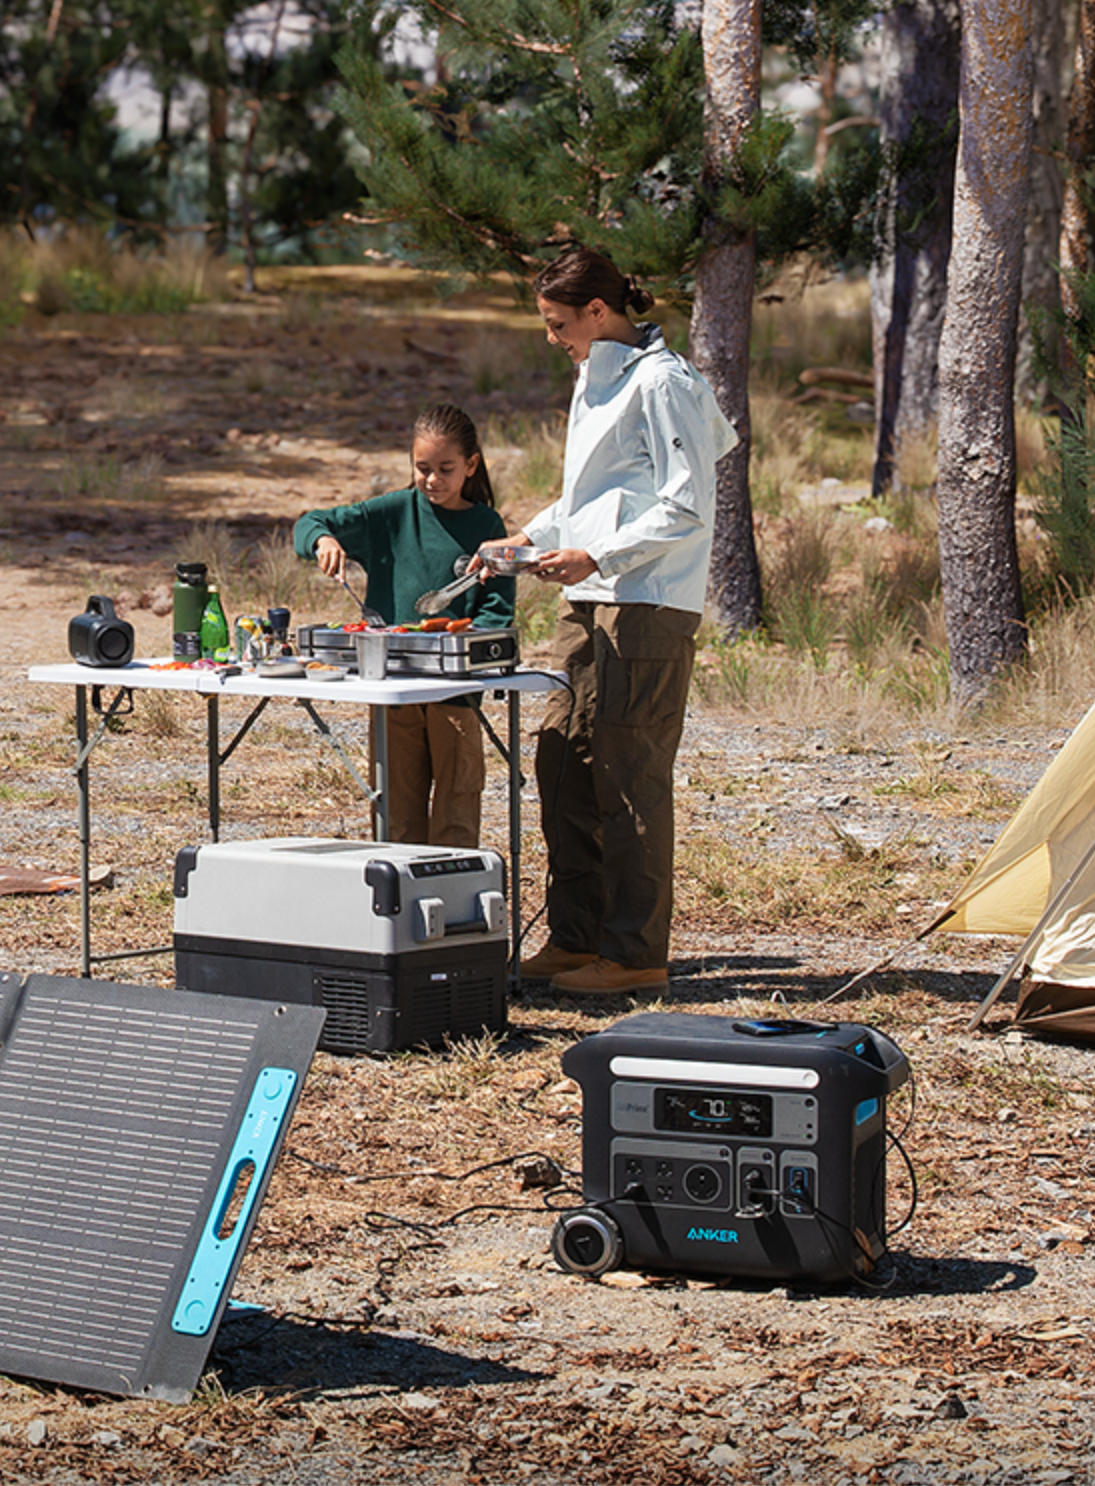 An Anker solar generator at a camp site.